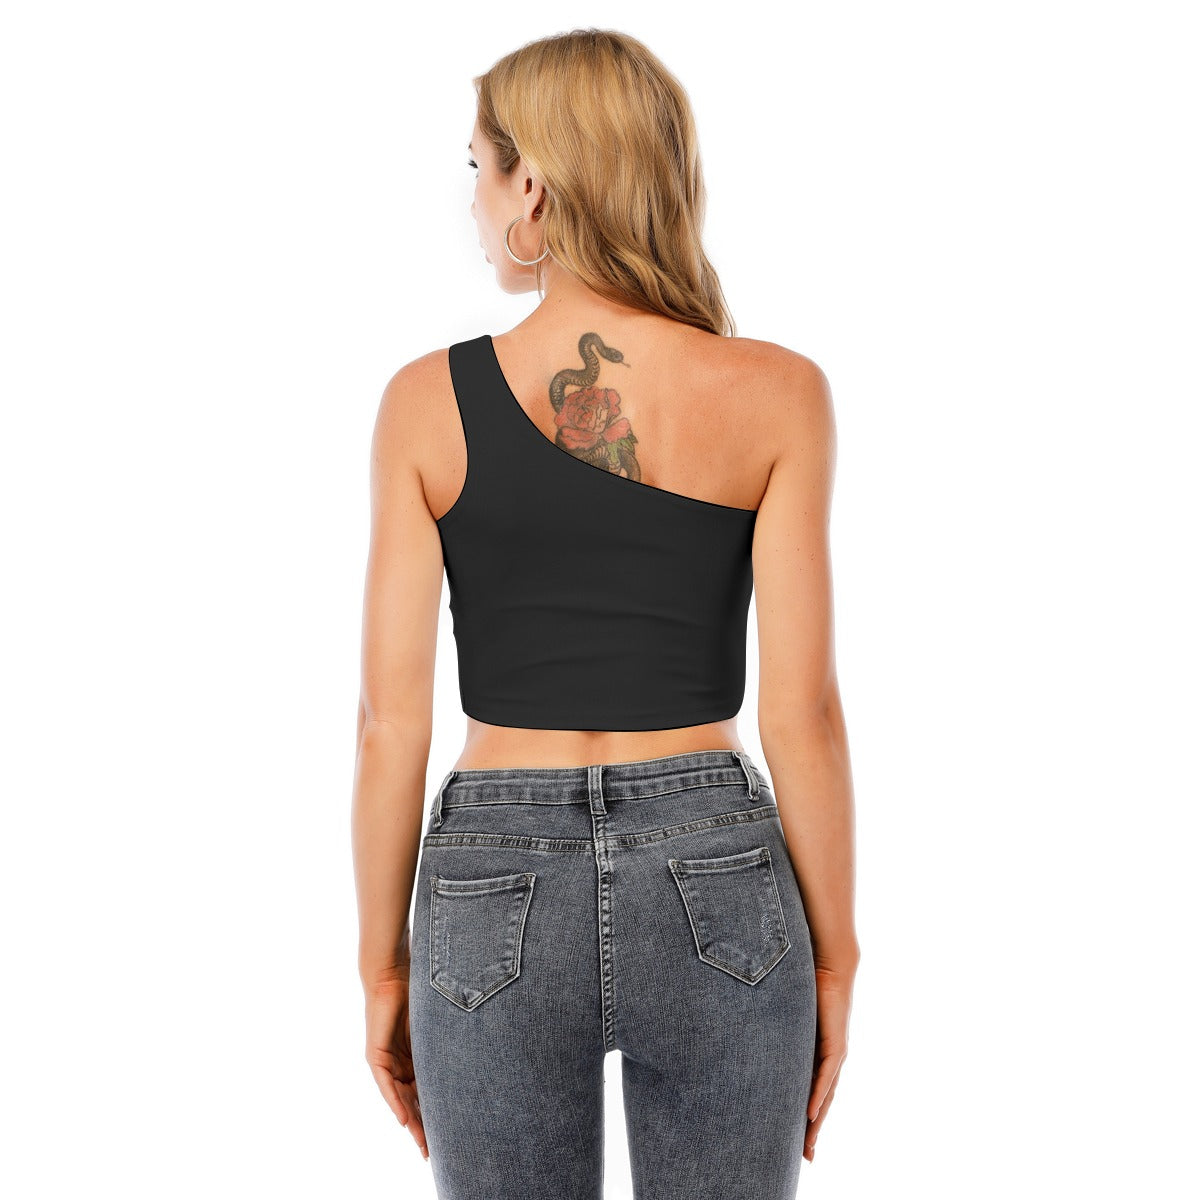 Graphic "Wifey" Women's One-Shoulder Cropped Top